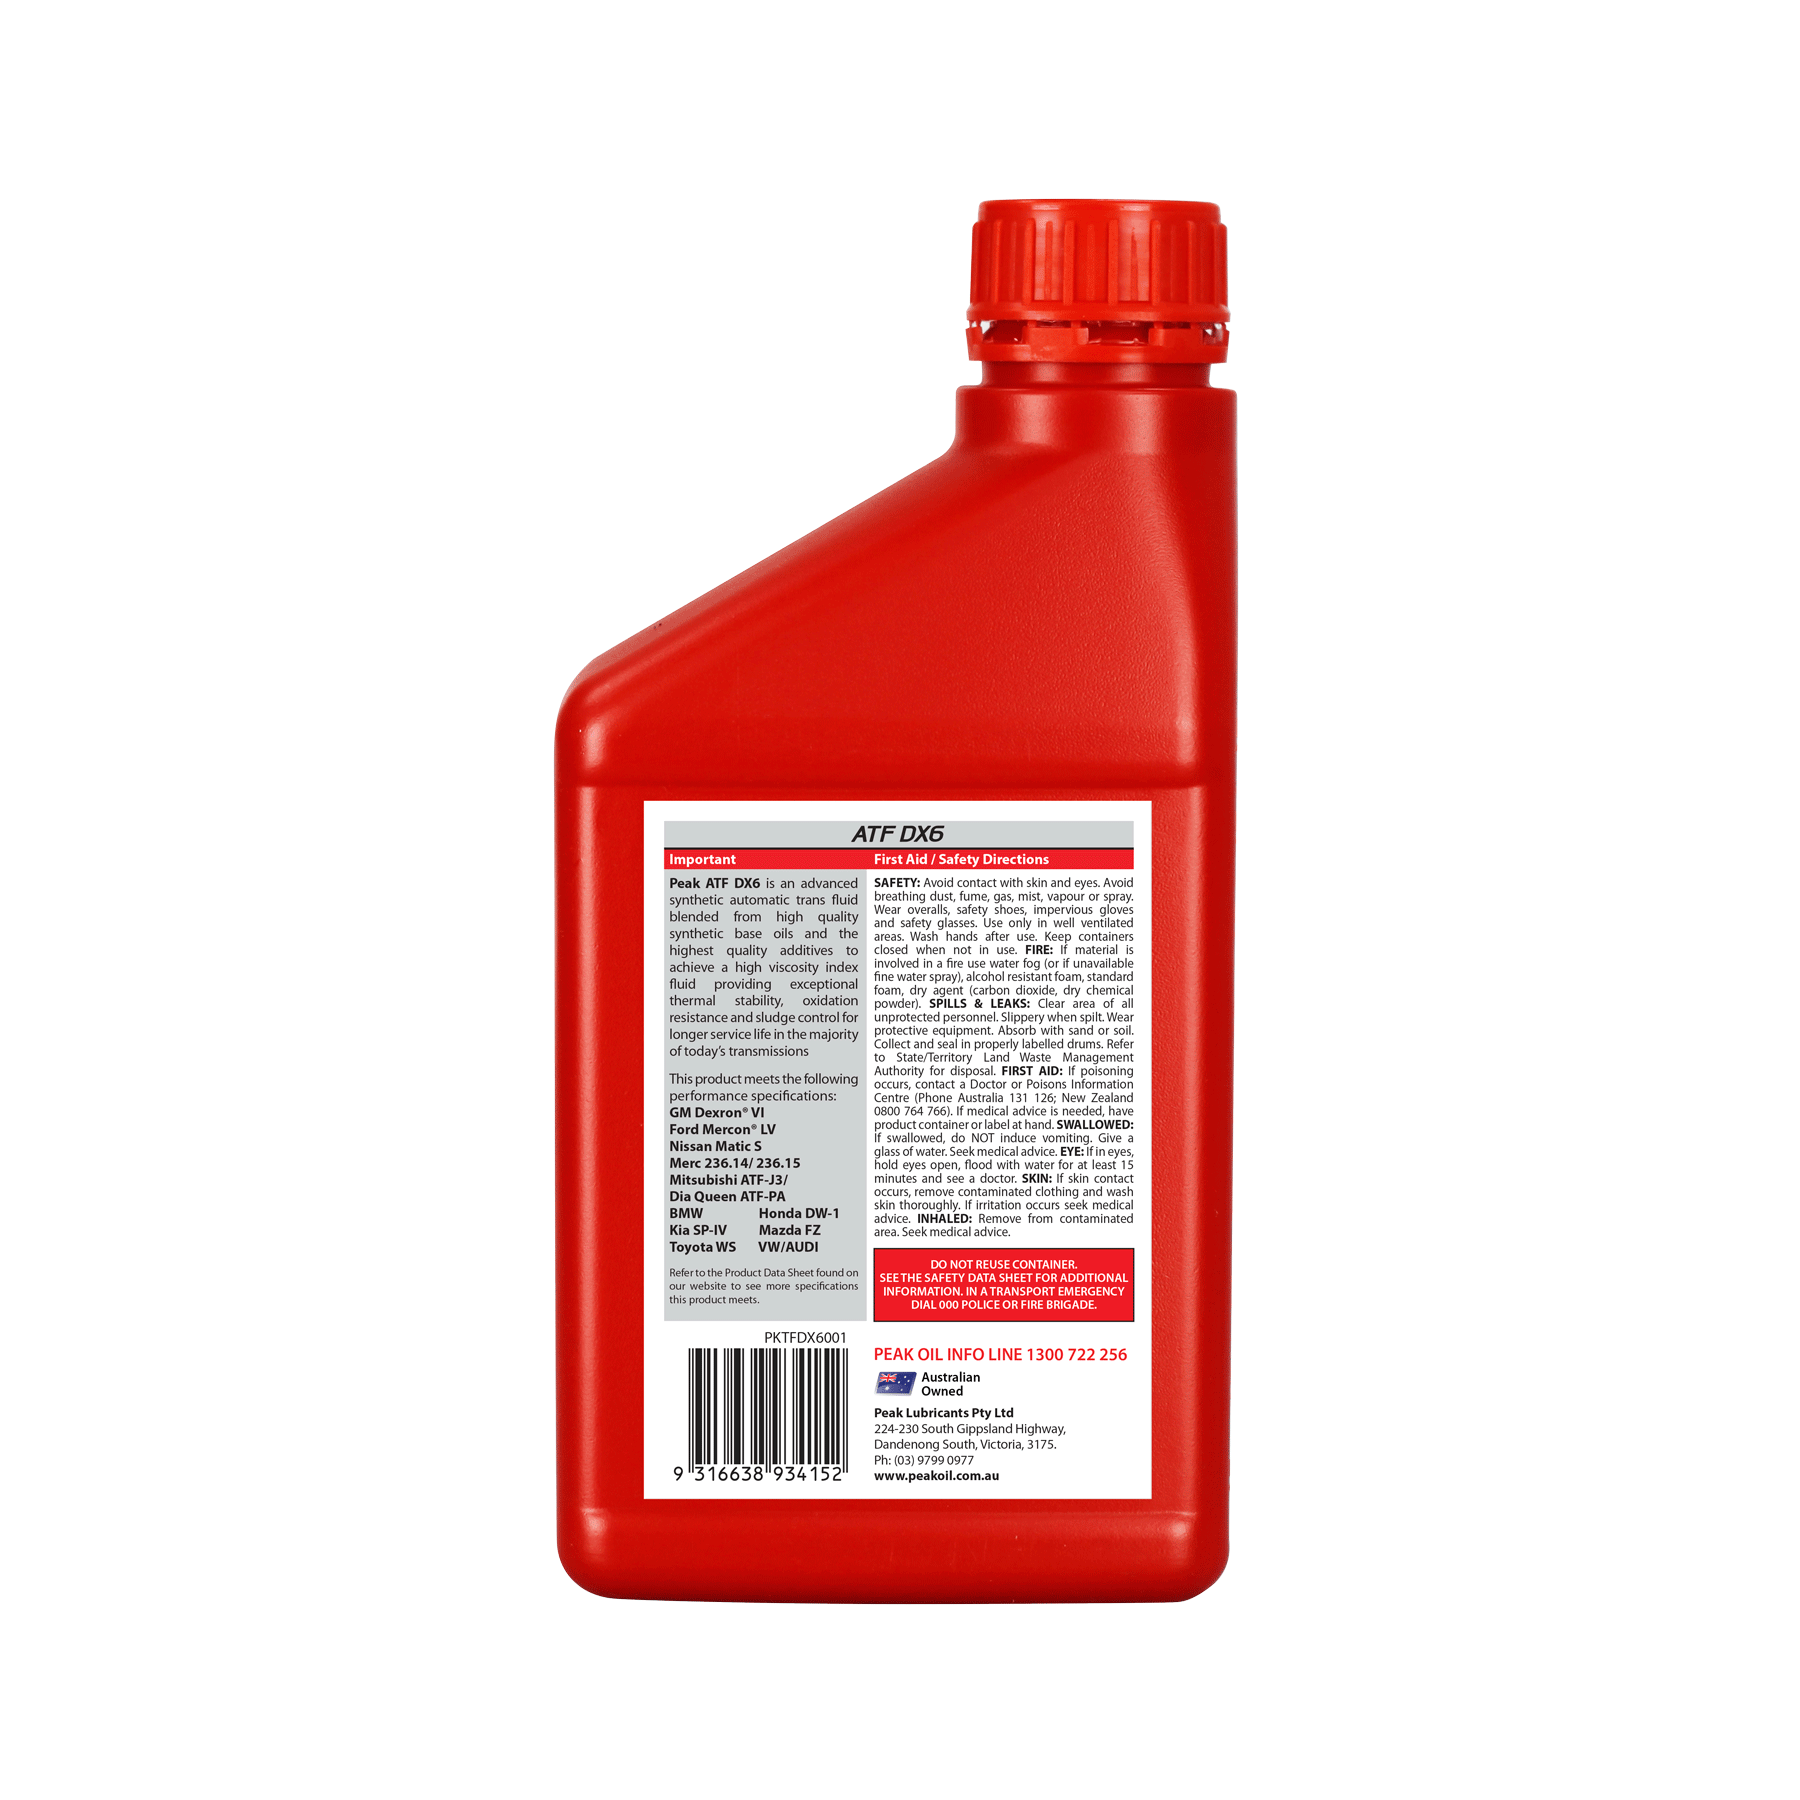 ROVER Full Synthetic DEXRON-VI Transmission Fluid